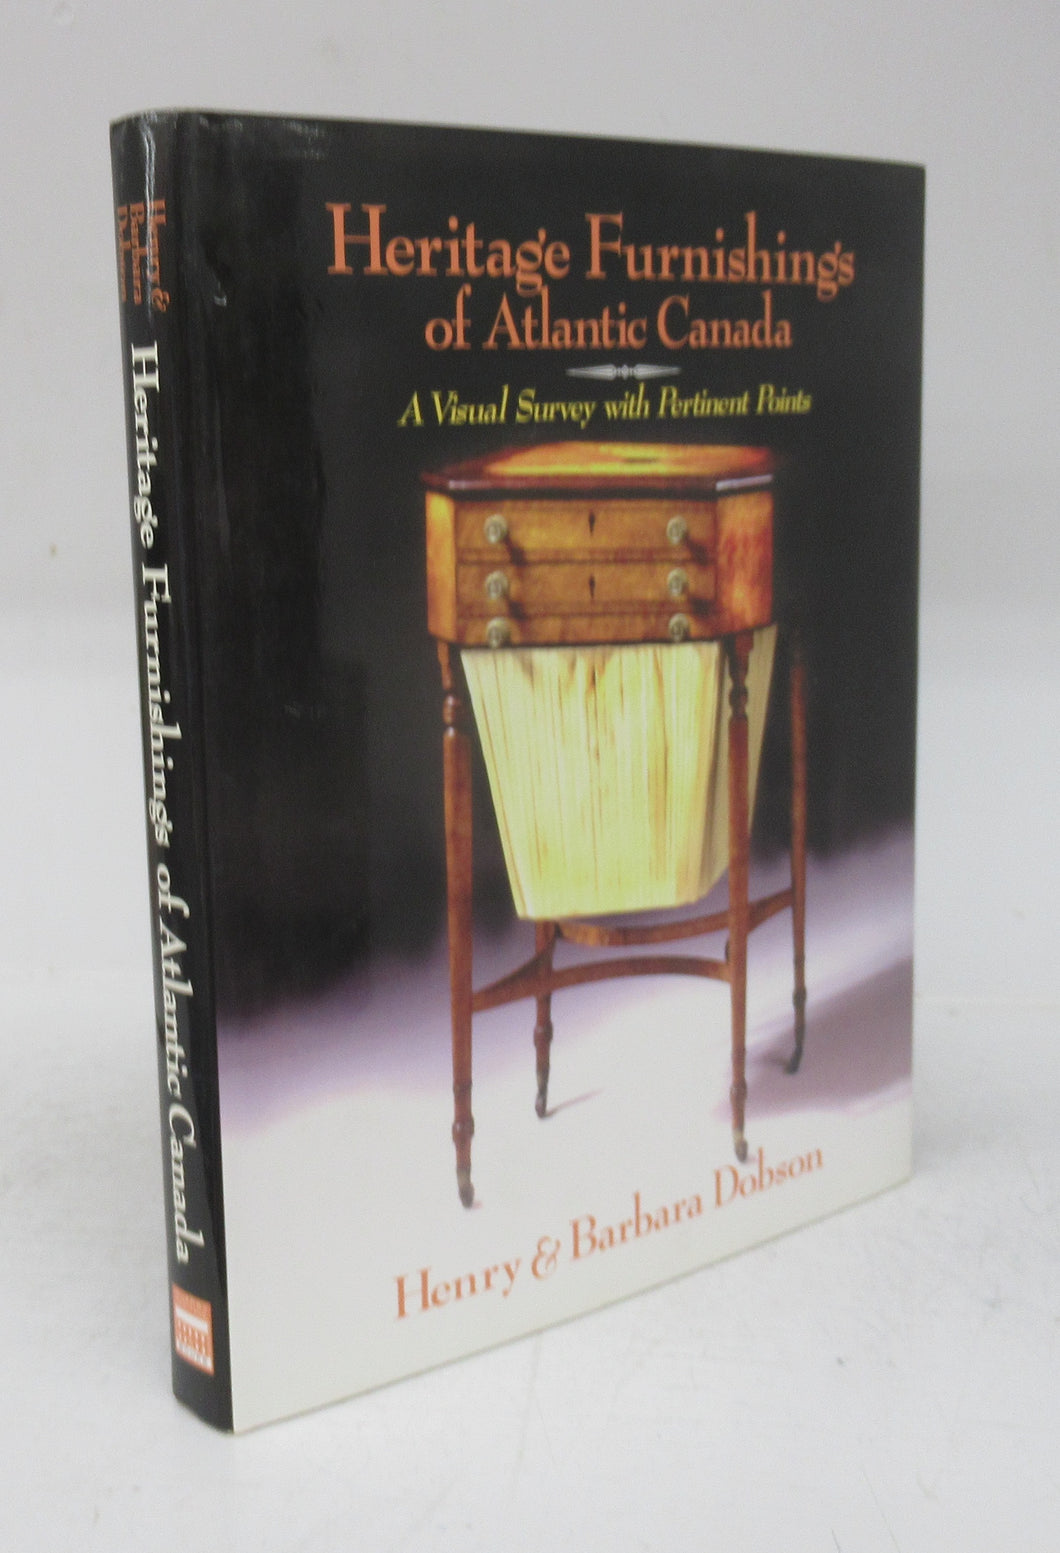 Heritage Furnishings of Atlantic Canada: A Visual Survey with Pertinent Points